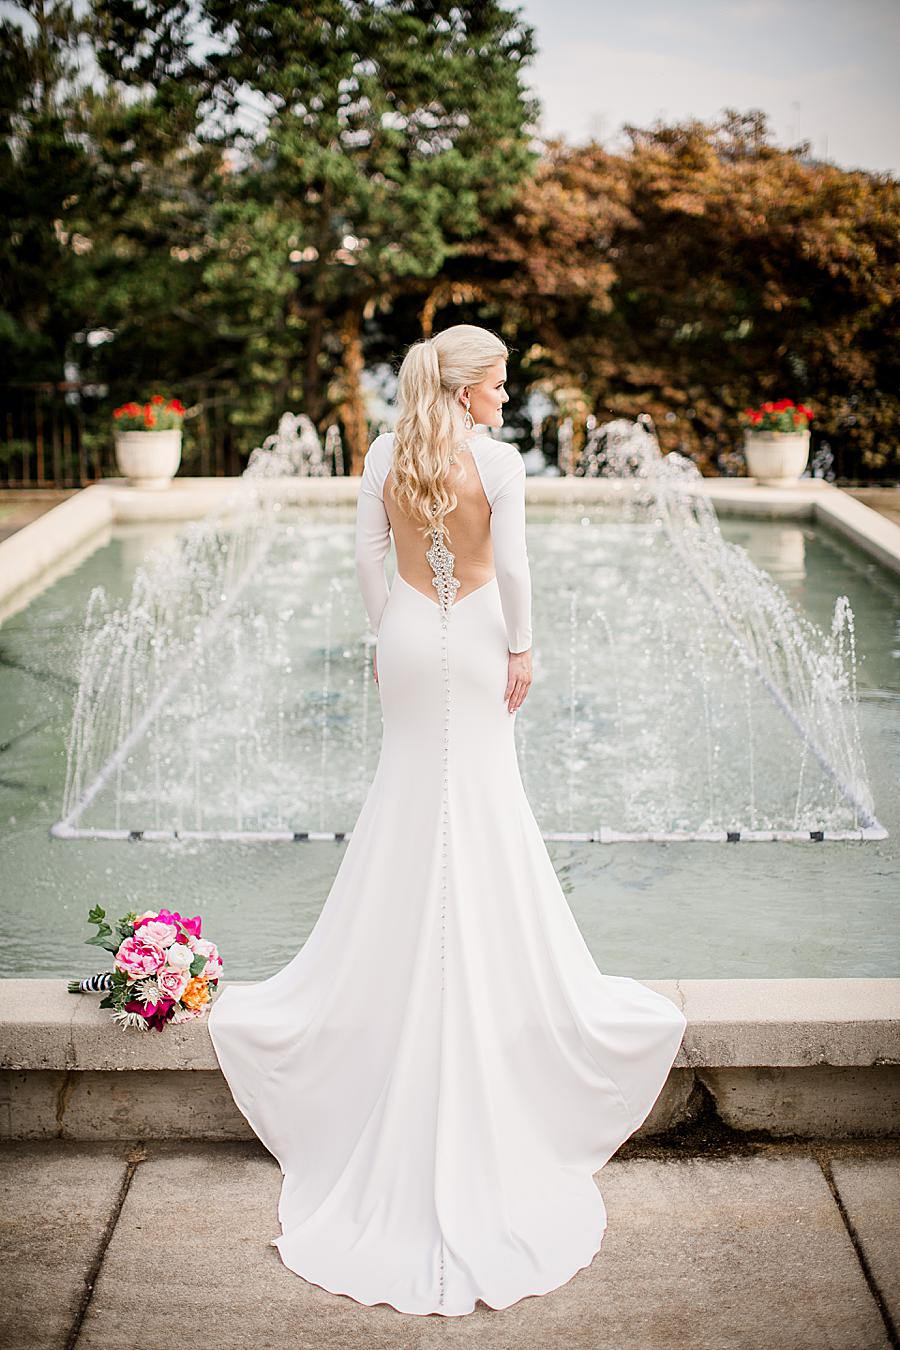 Fountain at this bridal session by Knoxville Wedding Photographer, Amanda May Photos.